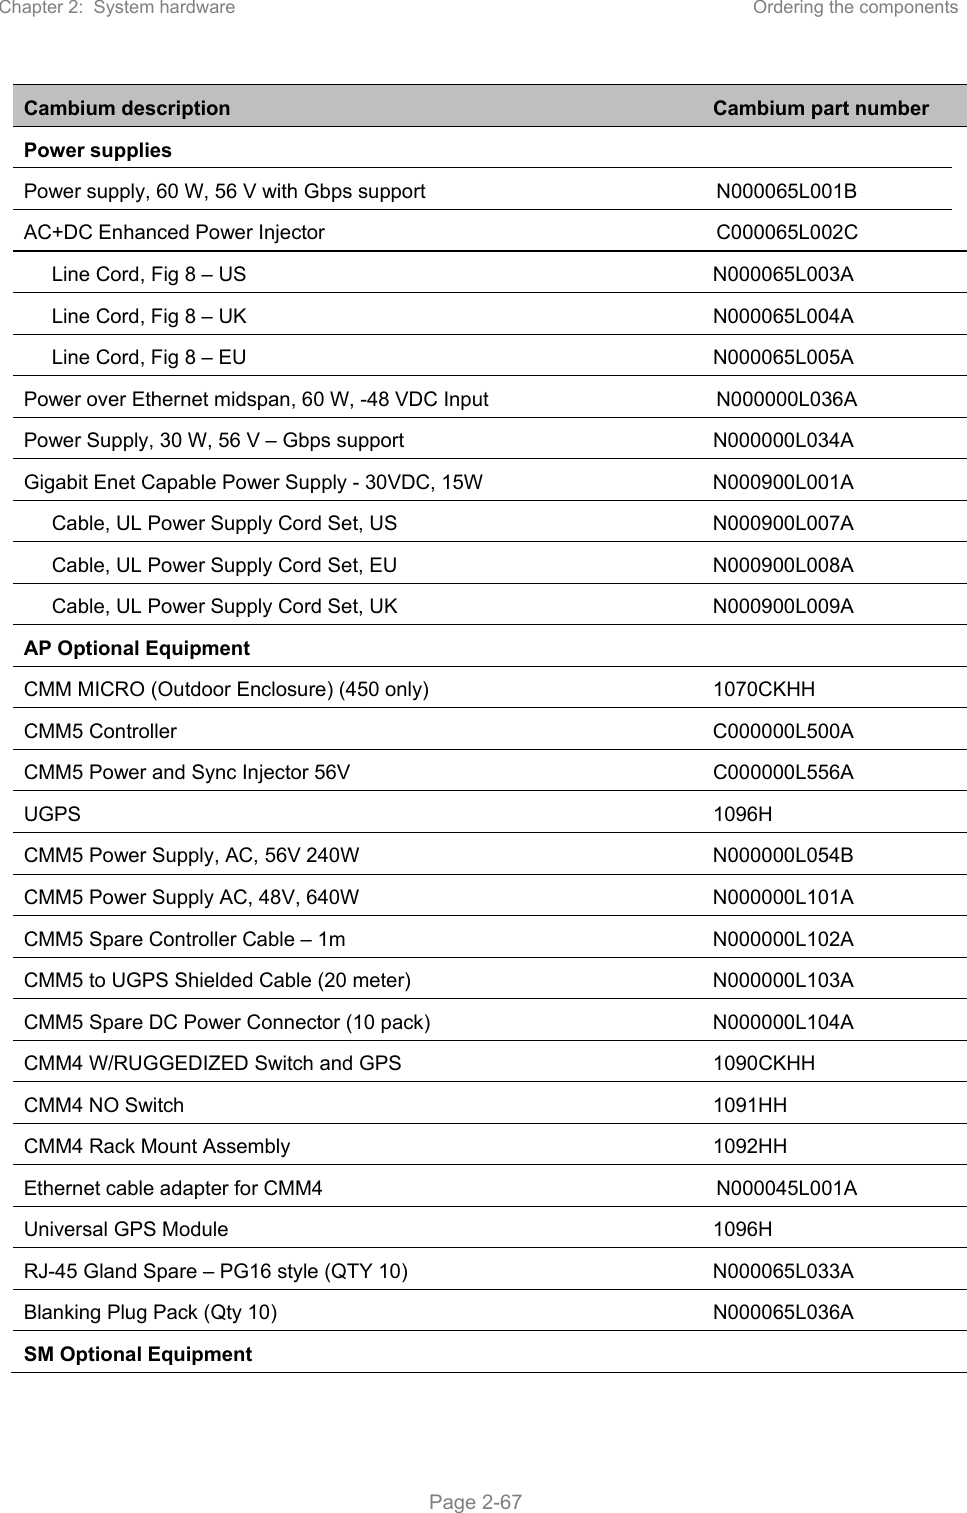 Chapter 2:  System hardware  Ordering the components   Page 2-67 Cambium description  Cambium part number Power supplies   Power supply, 60 W, 56 V with Gbps support  N000065L001B AC+DC Enhanced Power Injector  C000065L002C      Line Cord, Fig 8 – US  N000065L003A      Line Cord, Fig 8 – UK  N000065L004A      Line Cord, Fig 8 – EU  N000065L005A Power over Ethernet midspan, 60 W, -48 VDC Input  N000000L036A Power Supply, 30 W, 56 V – Gbps support N000000L034A Gigabit Enet Capable Power Supply - 30VDC, 15W  N000900L001A      Cable, UL Power Supply Cord Set, US  N000900L007A      Cable, UL Power Supply Cord Set, EU  N000900L008A      Cable, UL Power Supply Cord Set, UK  N000900L009A AP Optional Equipment   CMM MICRO (Outdoor Enclosure) (450 only)  1070CKHH CMM5 Controller  C000000L500A CMM5 Power and Sync Injector 56V  C000000L556A UGPS  1096H CMM5 Power Supply, AC, 56V 240W  N000000L054B CMM5 Power Supply AC, 48V, 640W  N000000L101A CMM5 Spare Controller Cable – 1m  N000000L102A CMM5 to UGPS Shielded Cable (20 meter)  N000000L103A CMM5 Spare DC Power Connector (10 pack)  N000000L104A CMM4 W/RUGGEDIZED Switch and GPS  1090CKHH CMM4 NO Switch  1091HH CMM4 Rack Mount Assembly  1092HH Ethernet cable adapter for CMM4  N000045L001A Universal GPS Module  1096H RJ-45 Gland Spare – PG16 style (QTY 10)  N000065L033A Blanking Plug Pack (Qty 10)  N000065L036A SM Optional Equipment   